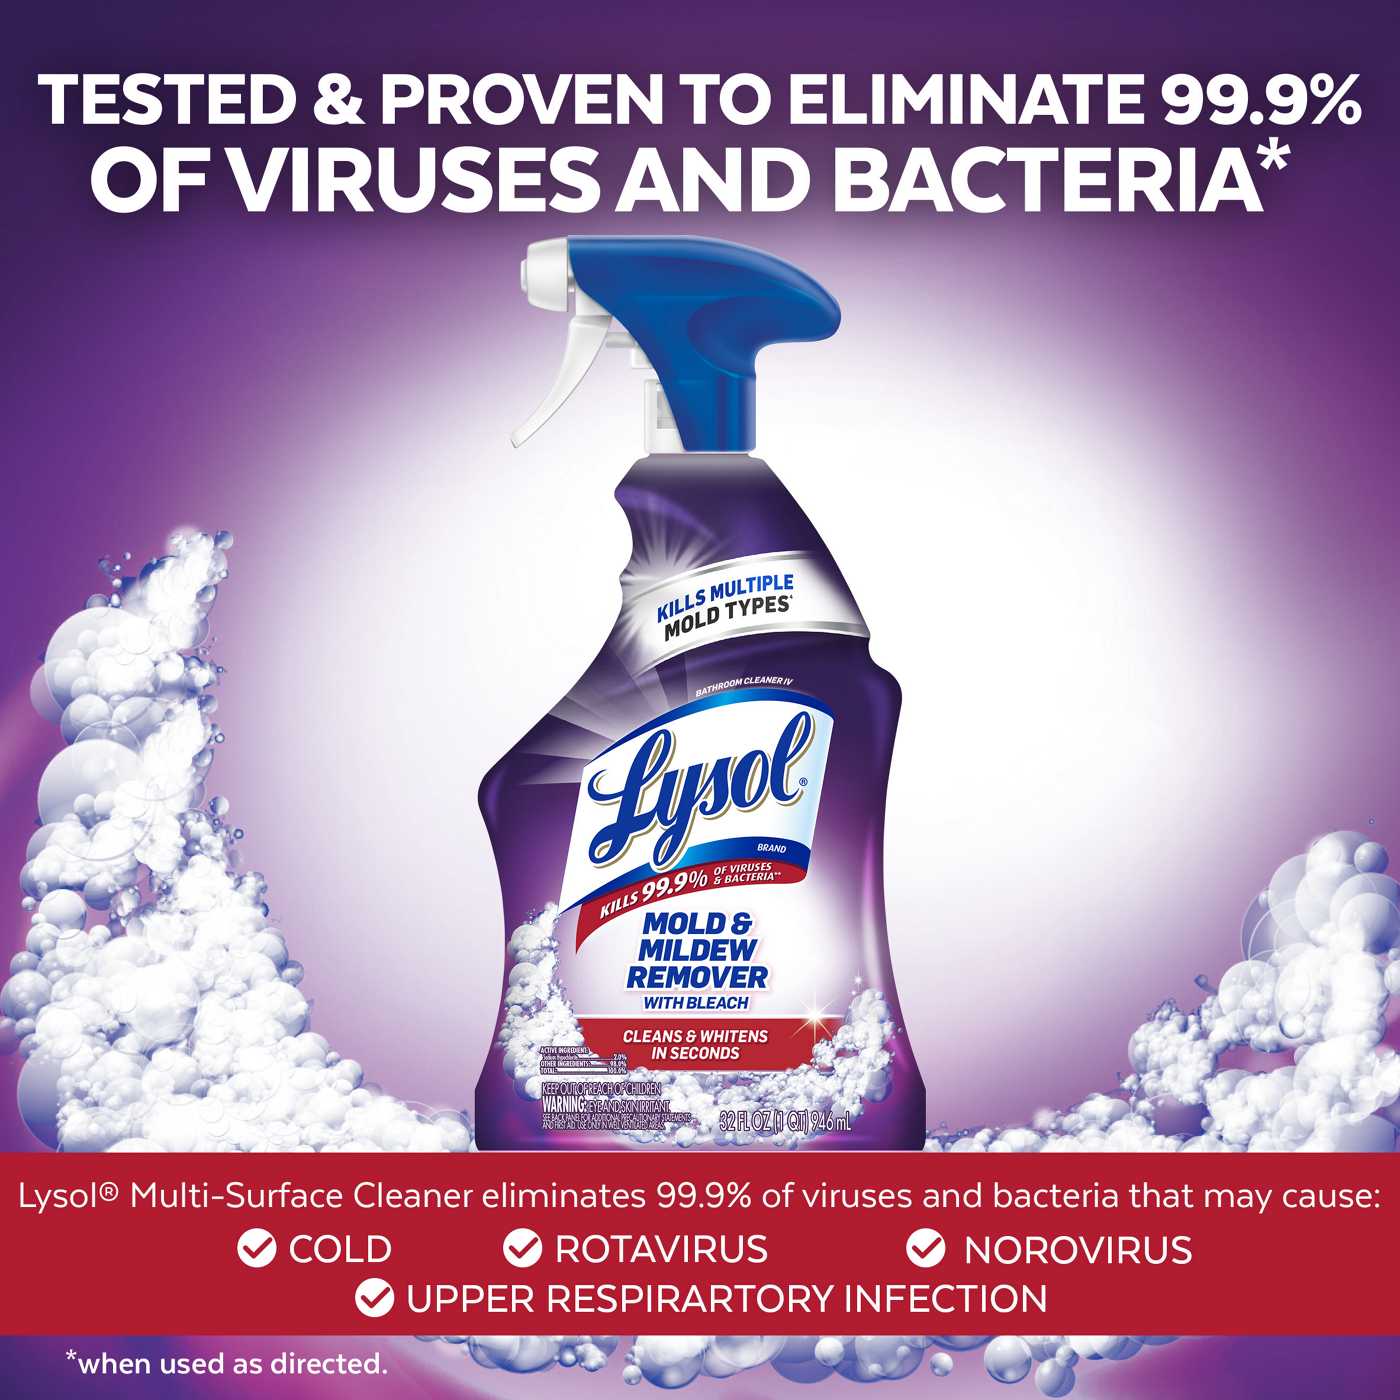 Lysol Mold & Mildew Remover with Bleach Cleaner Spray; image 2 of 3